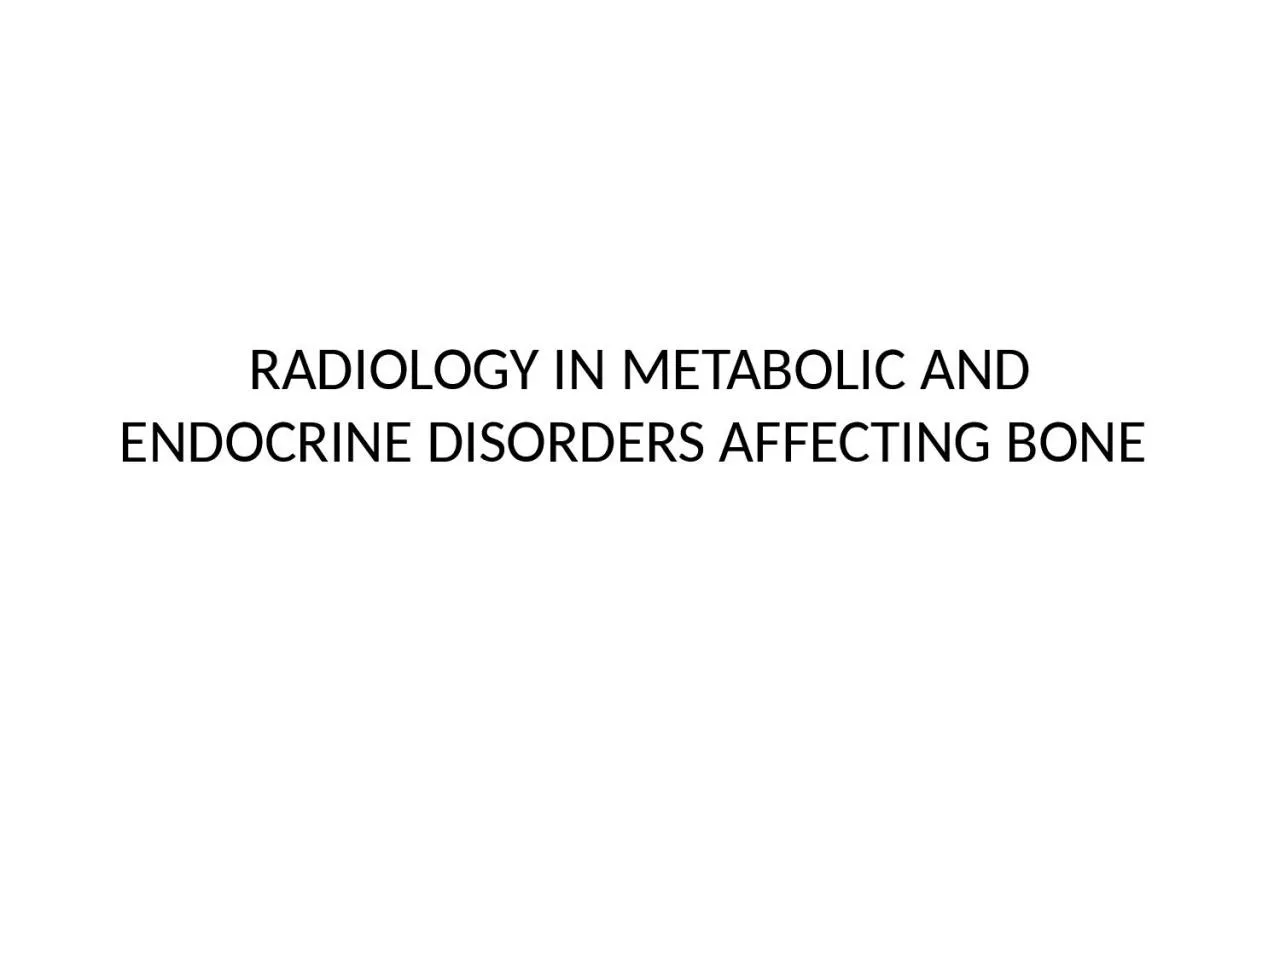 RADIOLOGY IN METABOLIC AND ENDOCRINE DISORDERS AFFECTING BONE